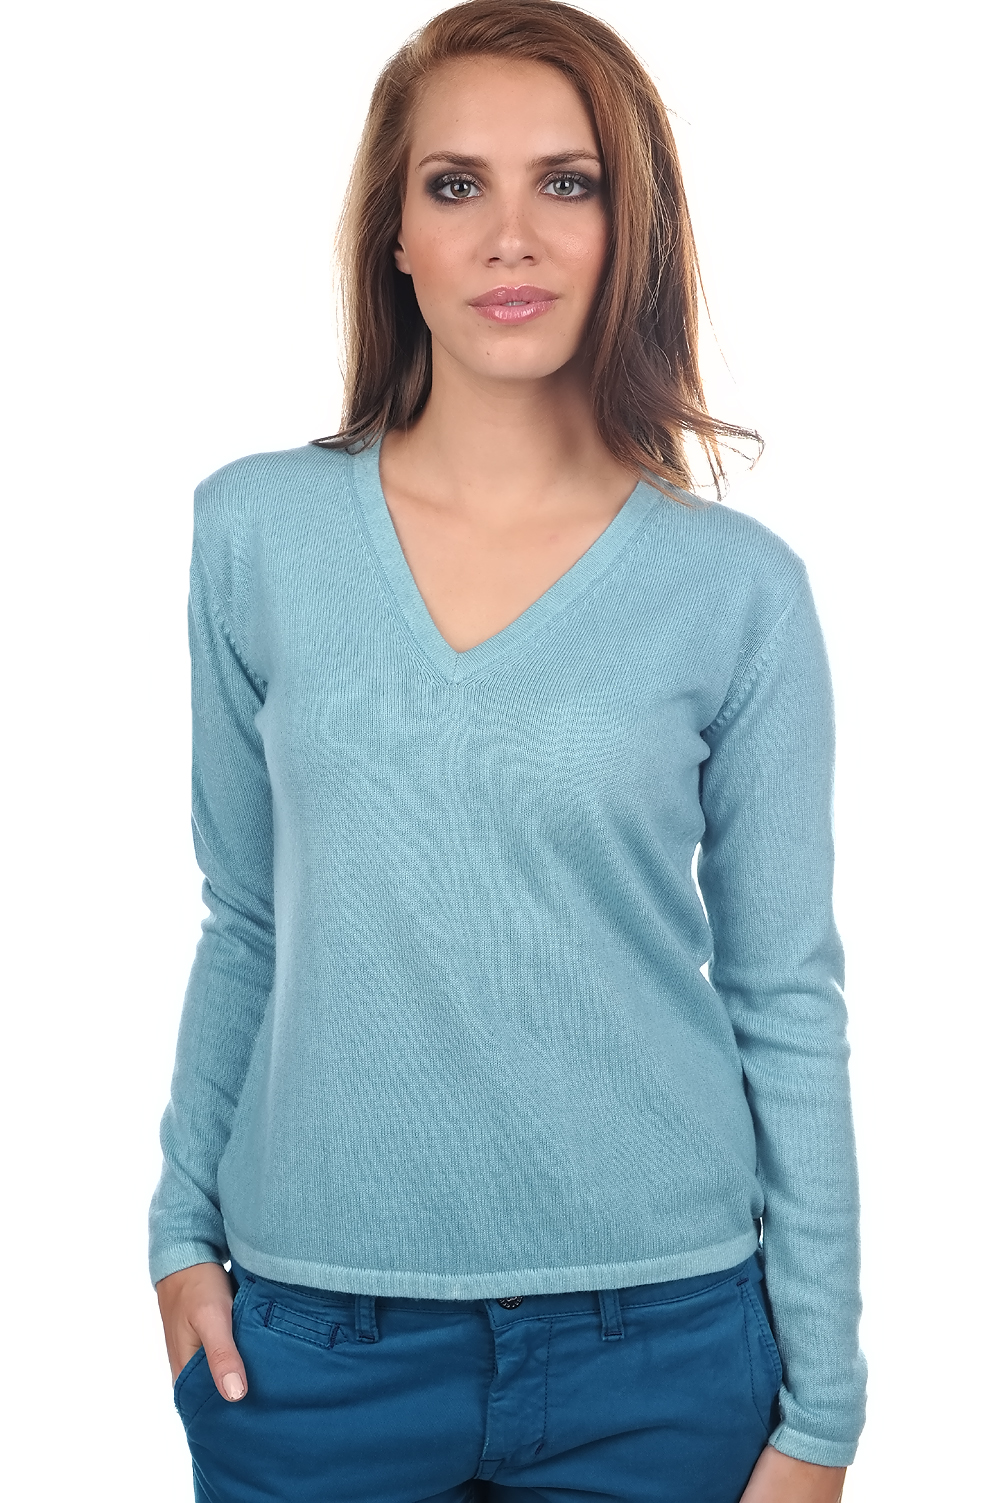 Cashmere ladies spring summer collection emma teal blue s